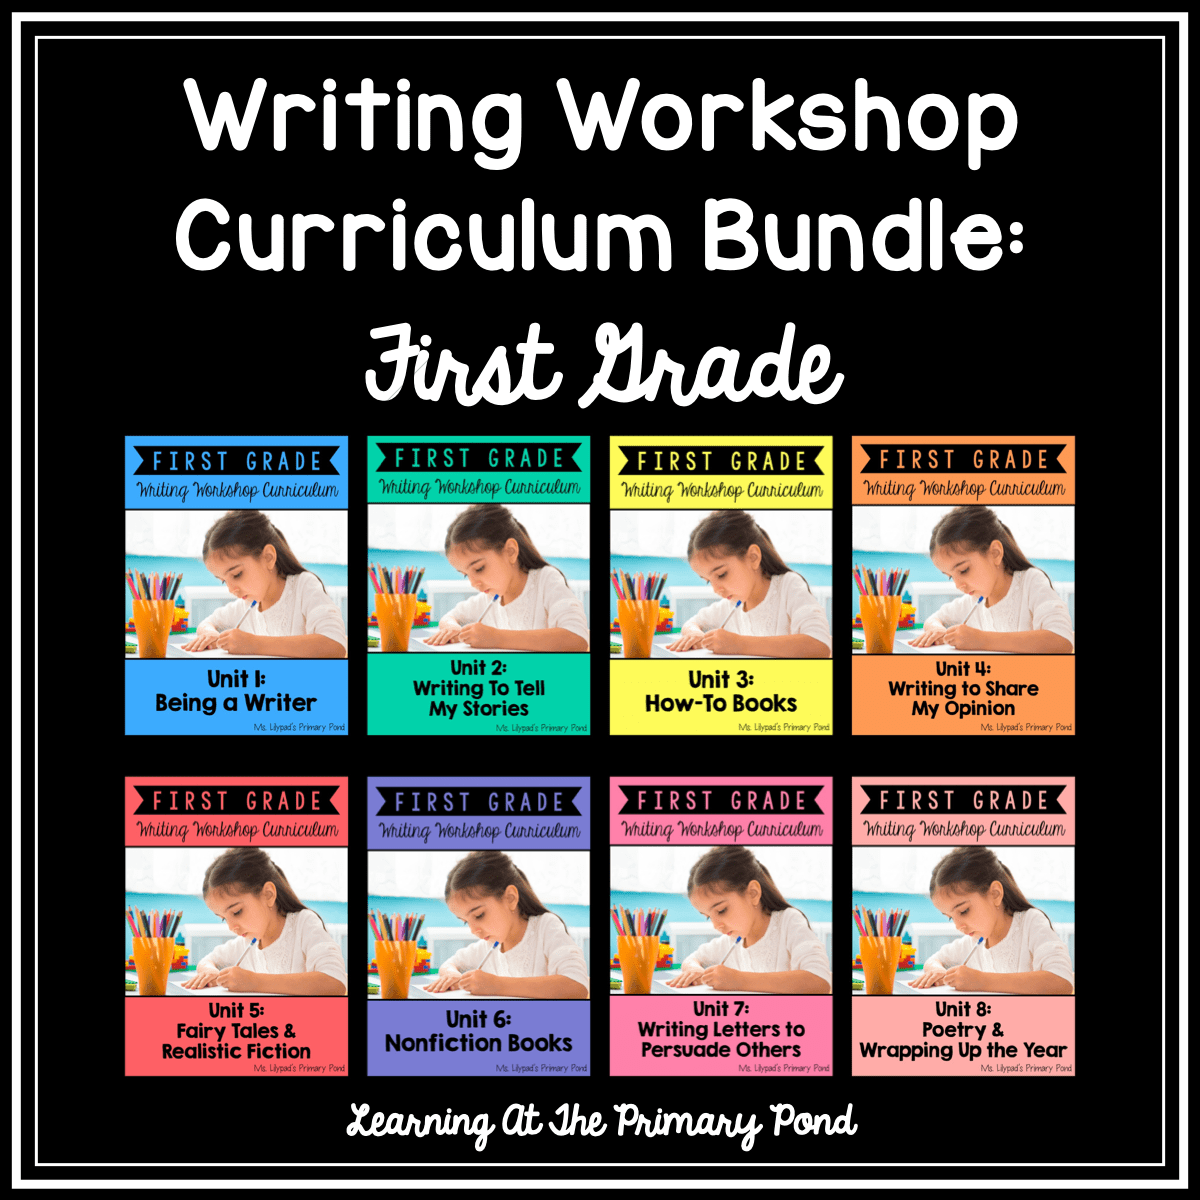 Writing Workshop Curriculum Sale - First Grade Bundle - learning-at-the-primary-pond